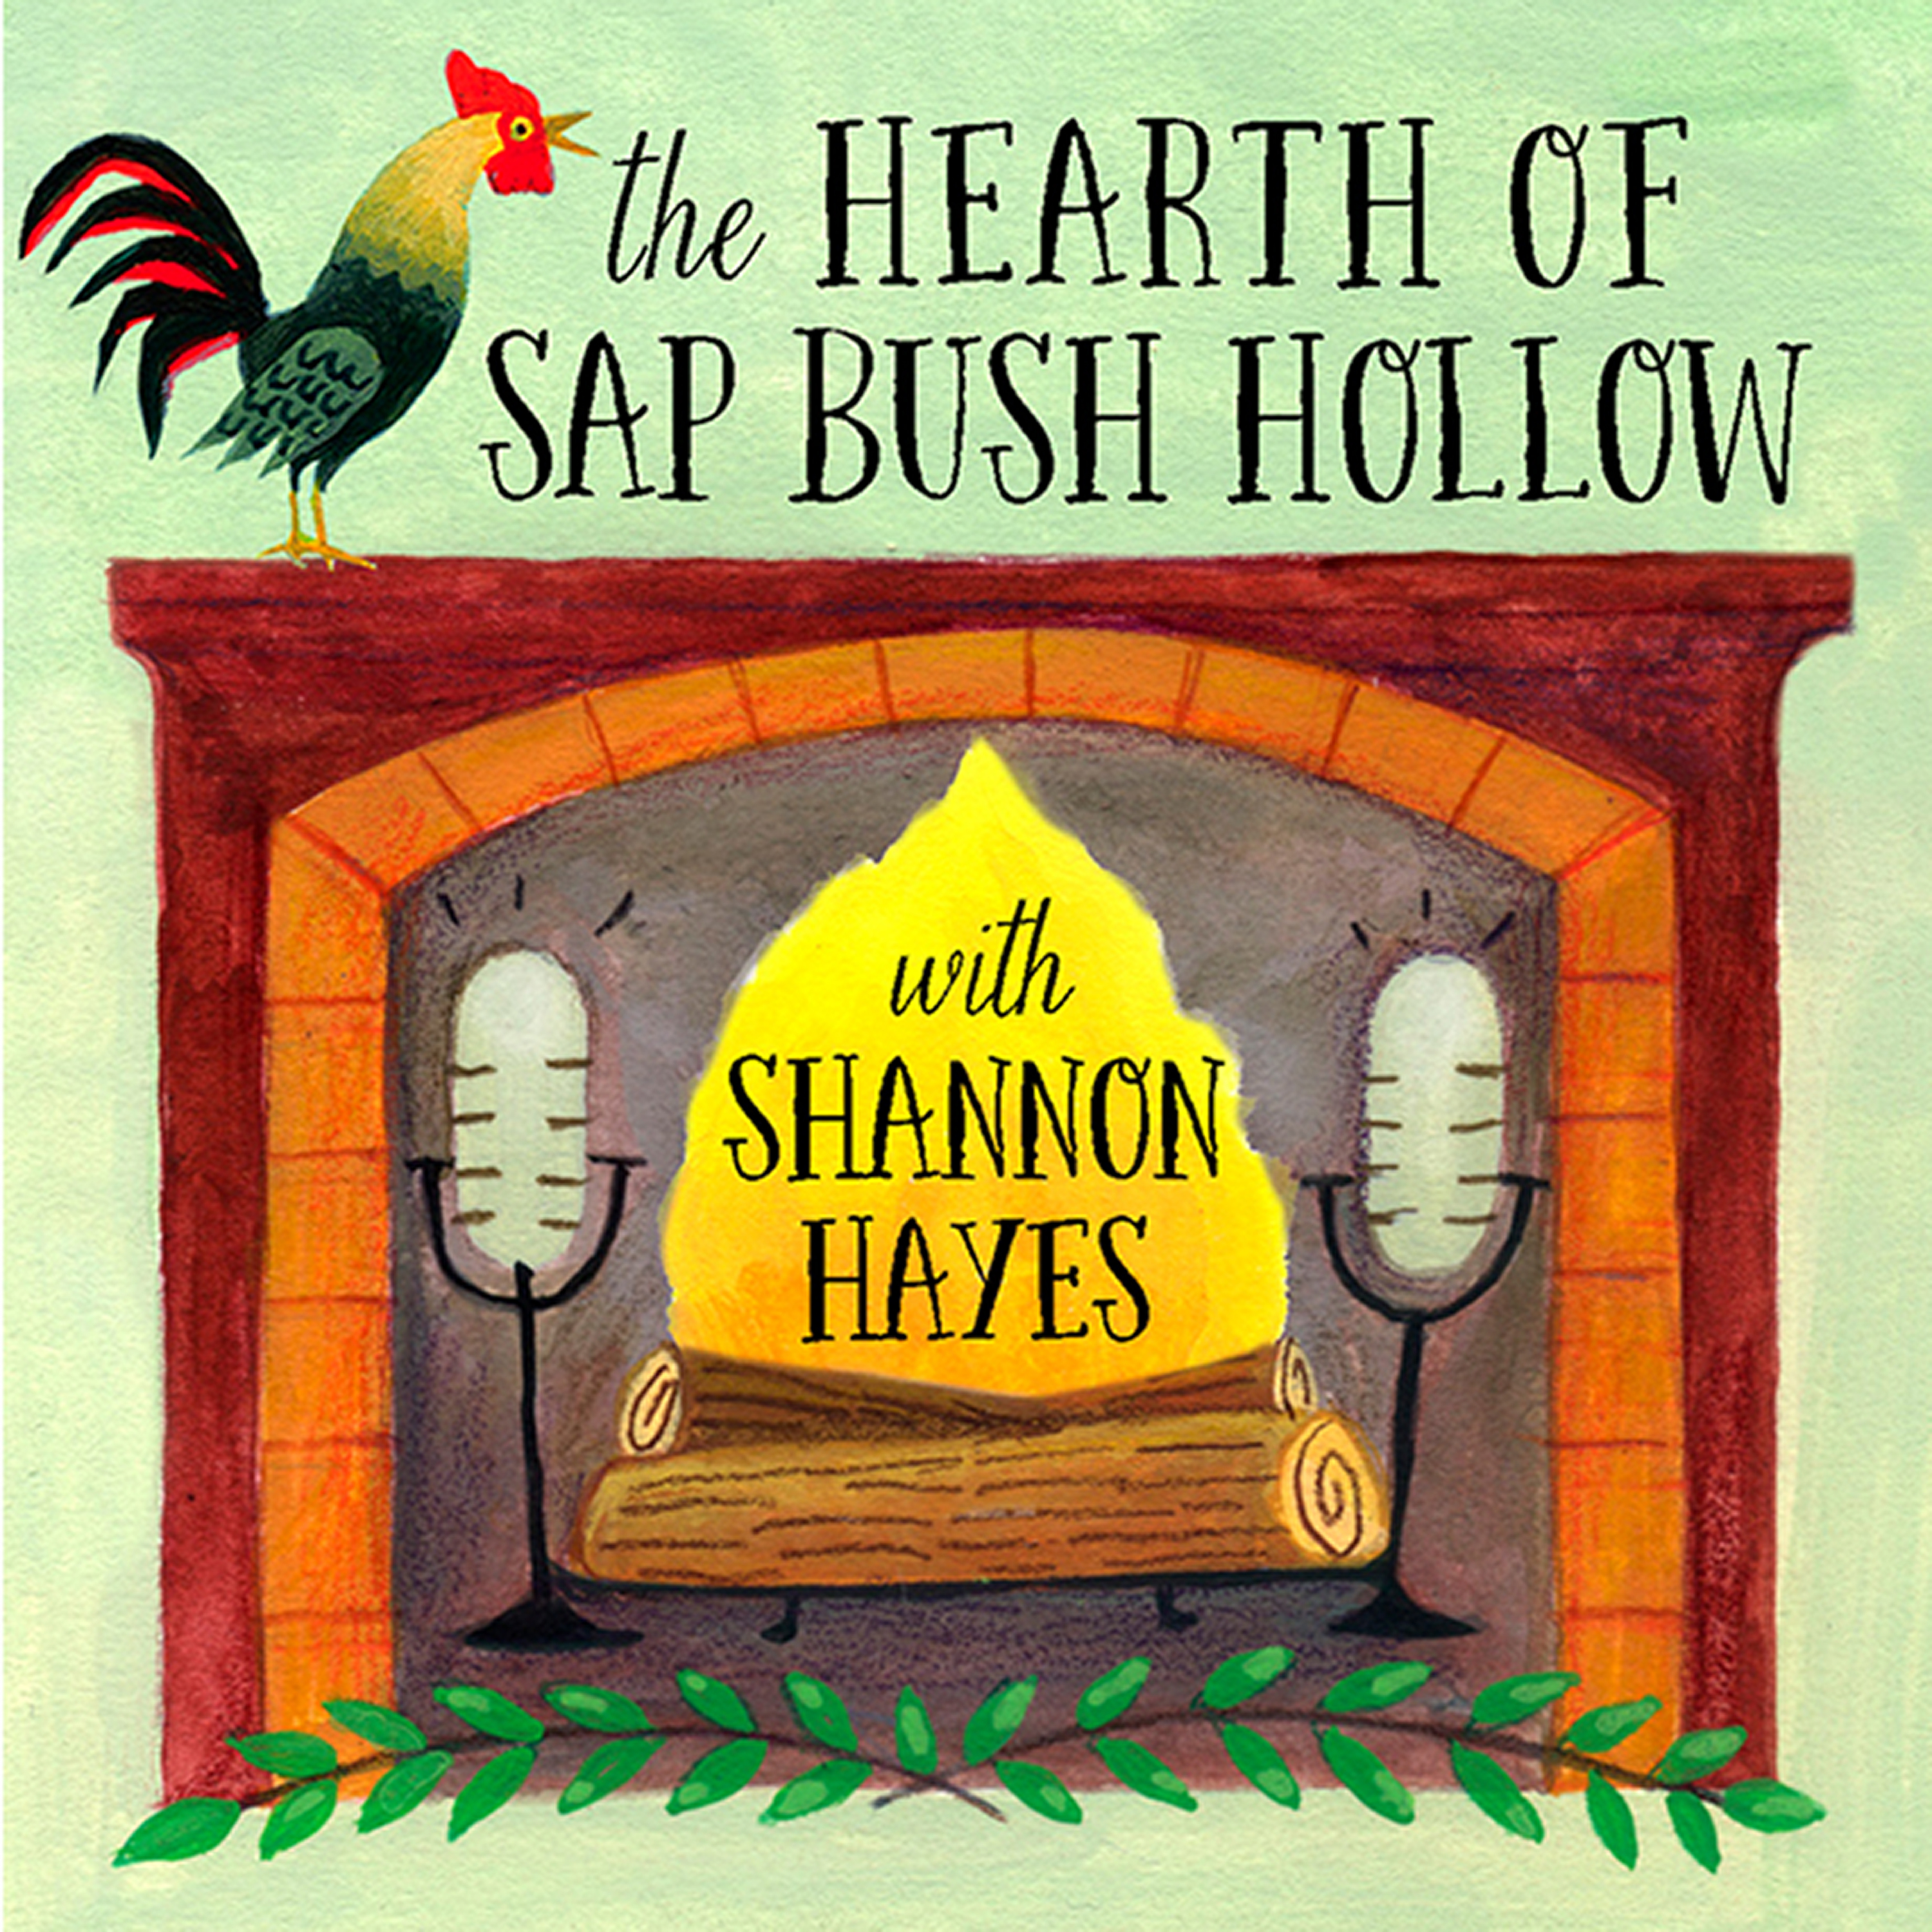 The Hearth of Sap Bush Hollow is on pause this week